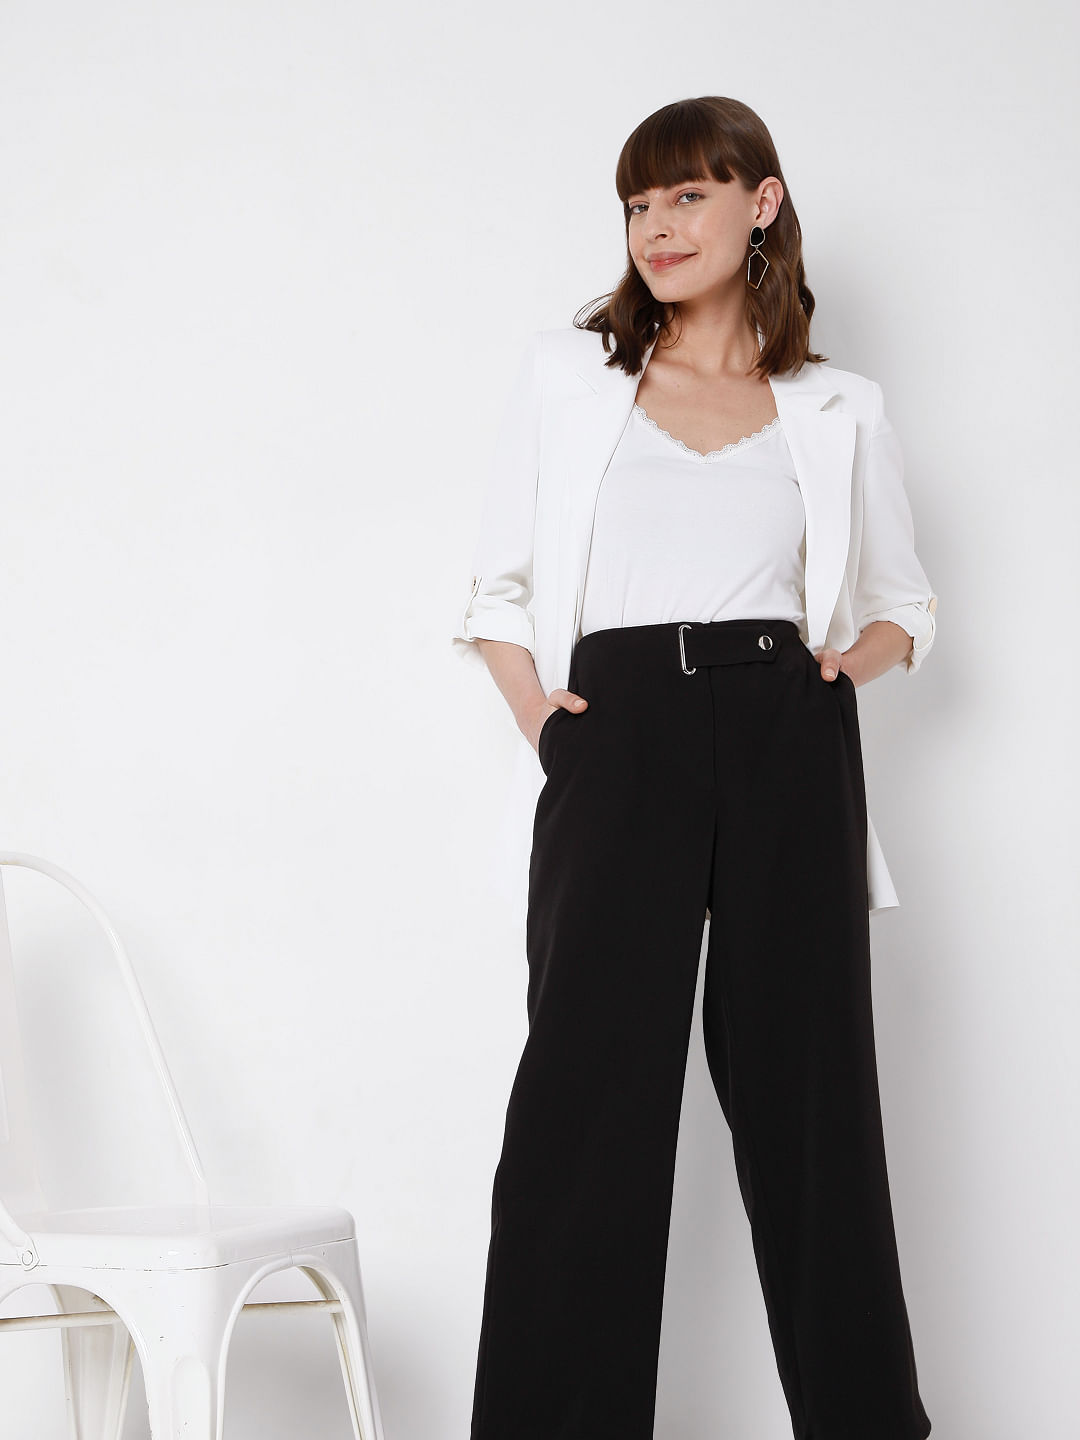 Sleek Tailored Trousers in Classic Black – Affordable Chic